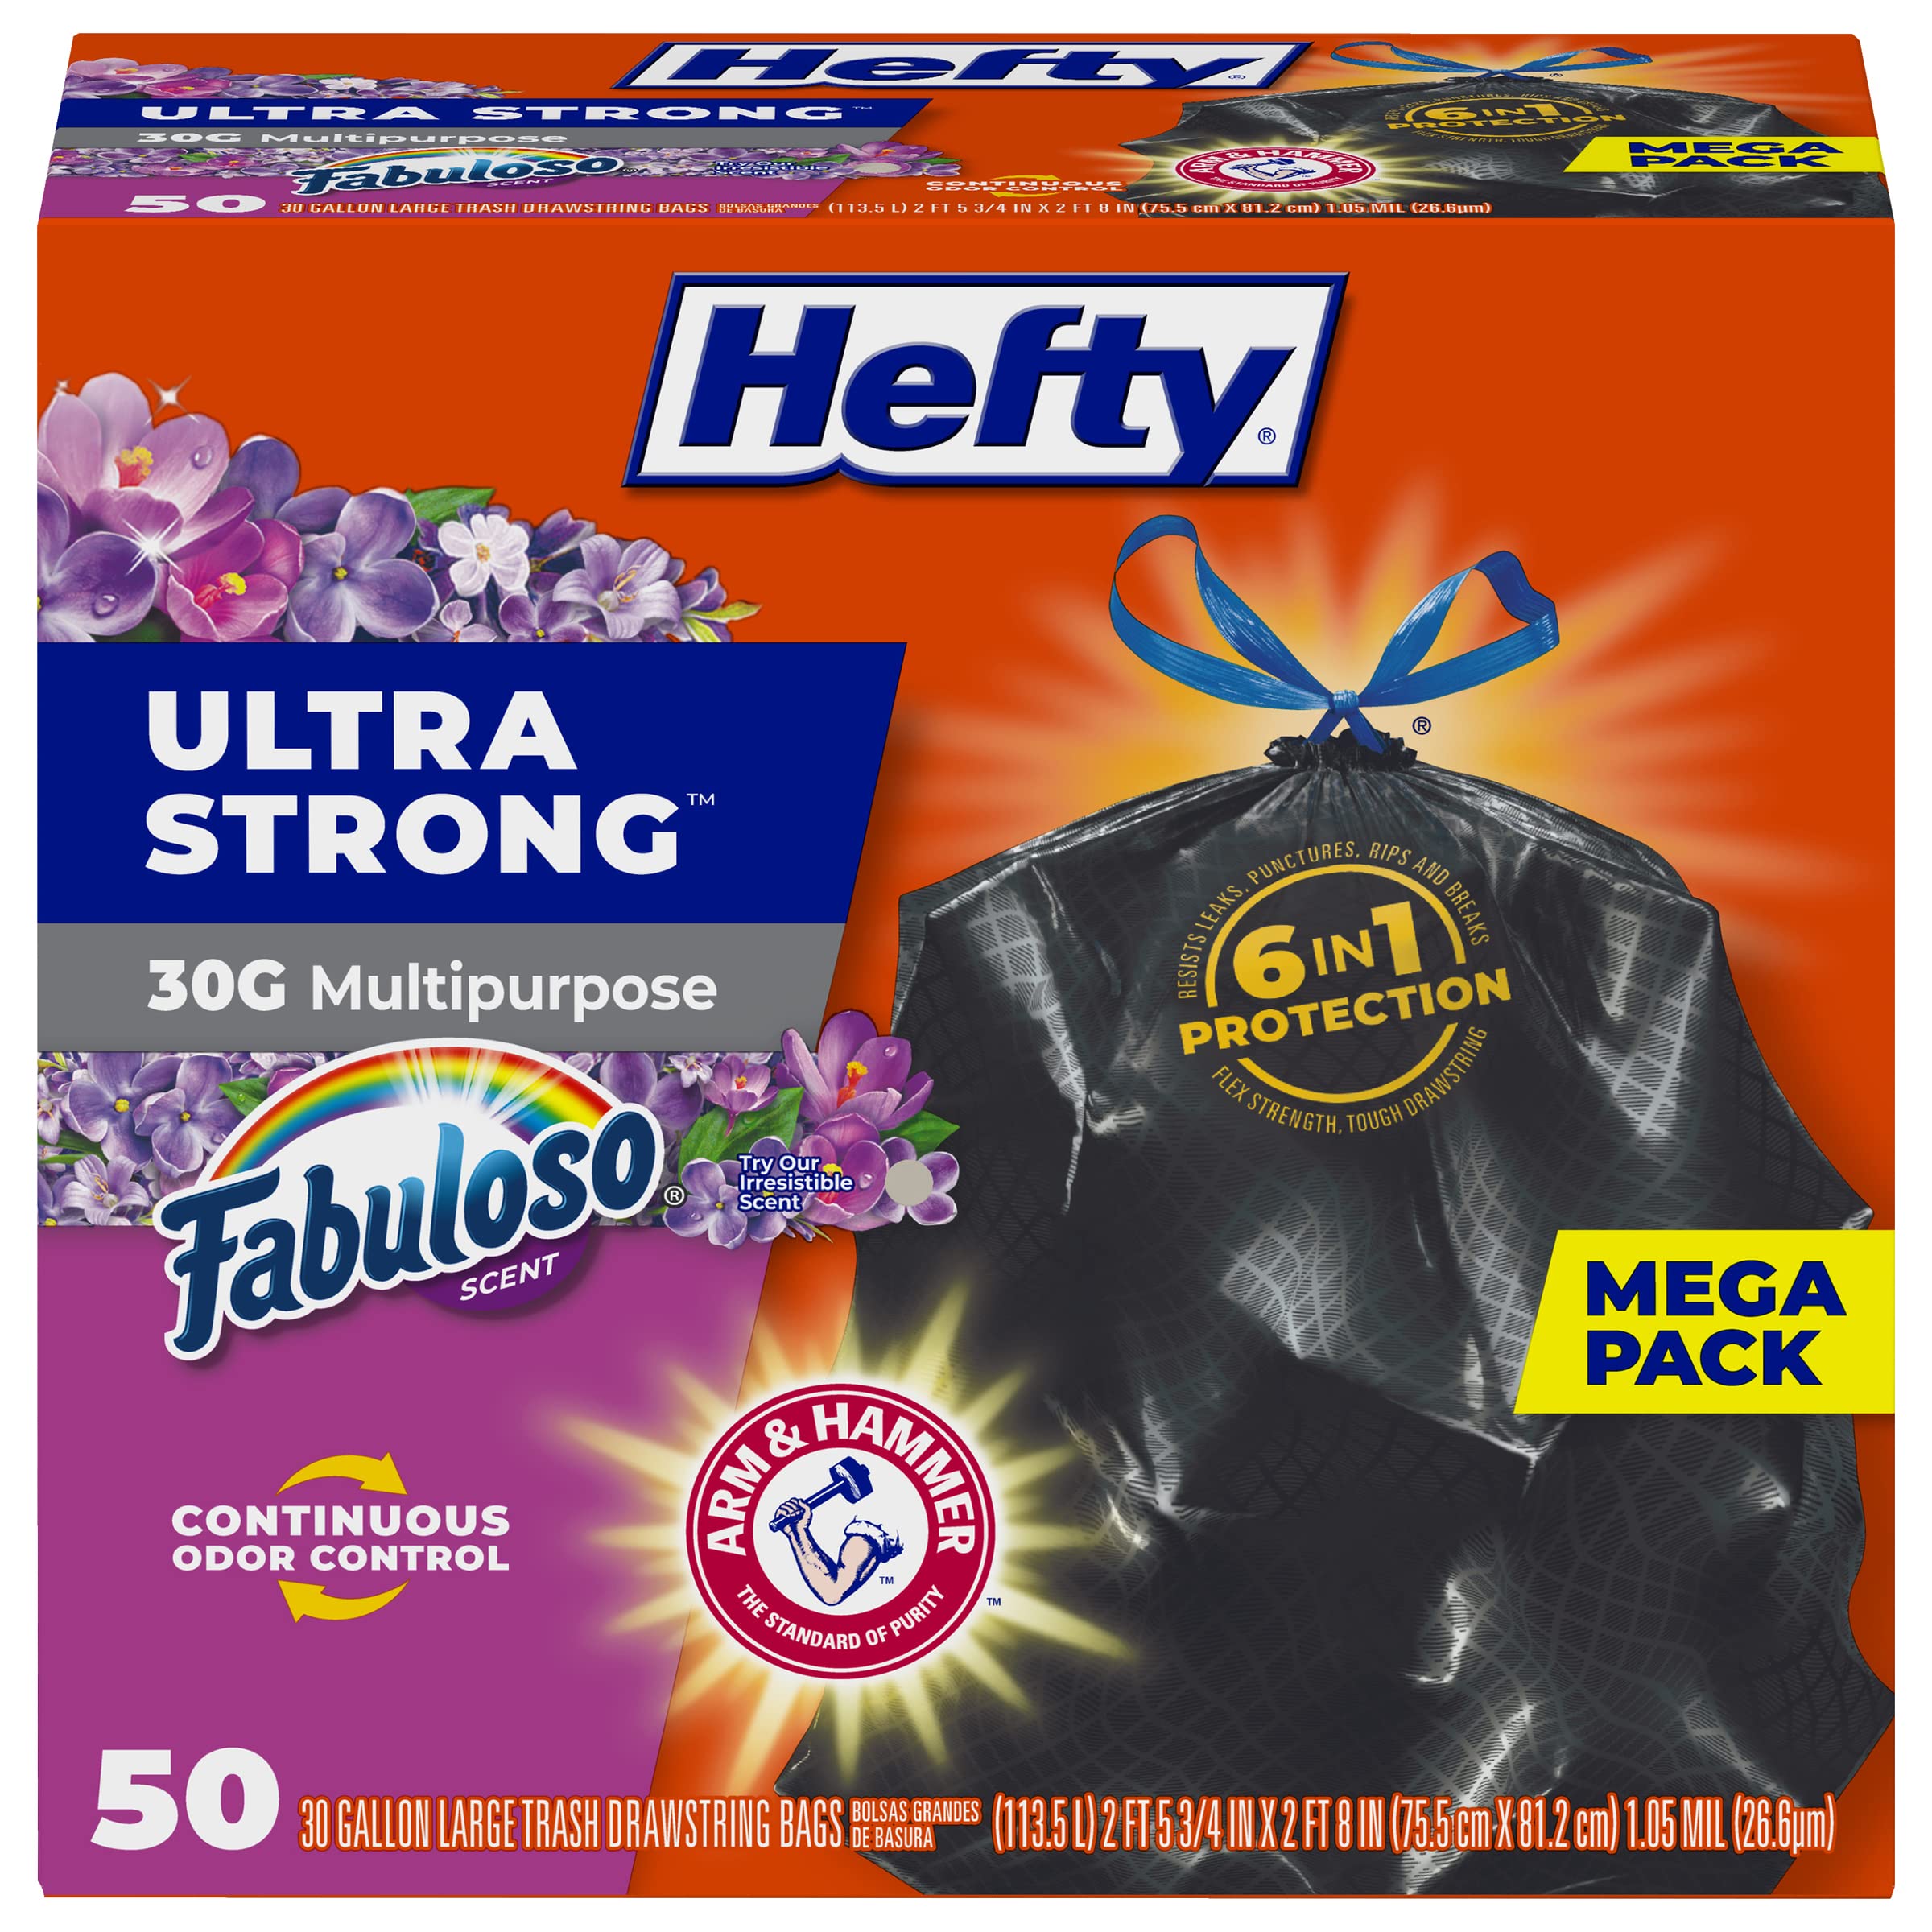 50-Count 30-Gallon Hefty Ultra Strong Multipurpose Large Trash Bag (Black, Fabuloso Scent) $11.95 w/ S&S + Free Shipping w/ Prime or on $35+